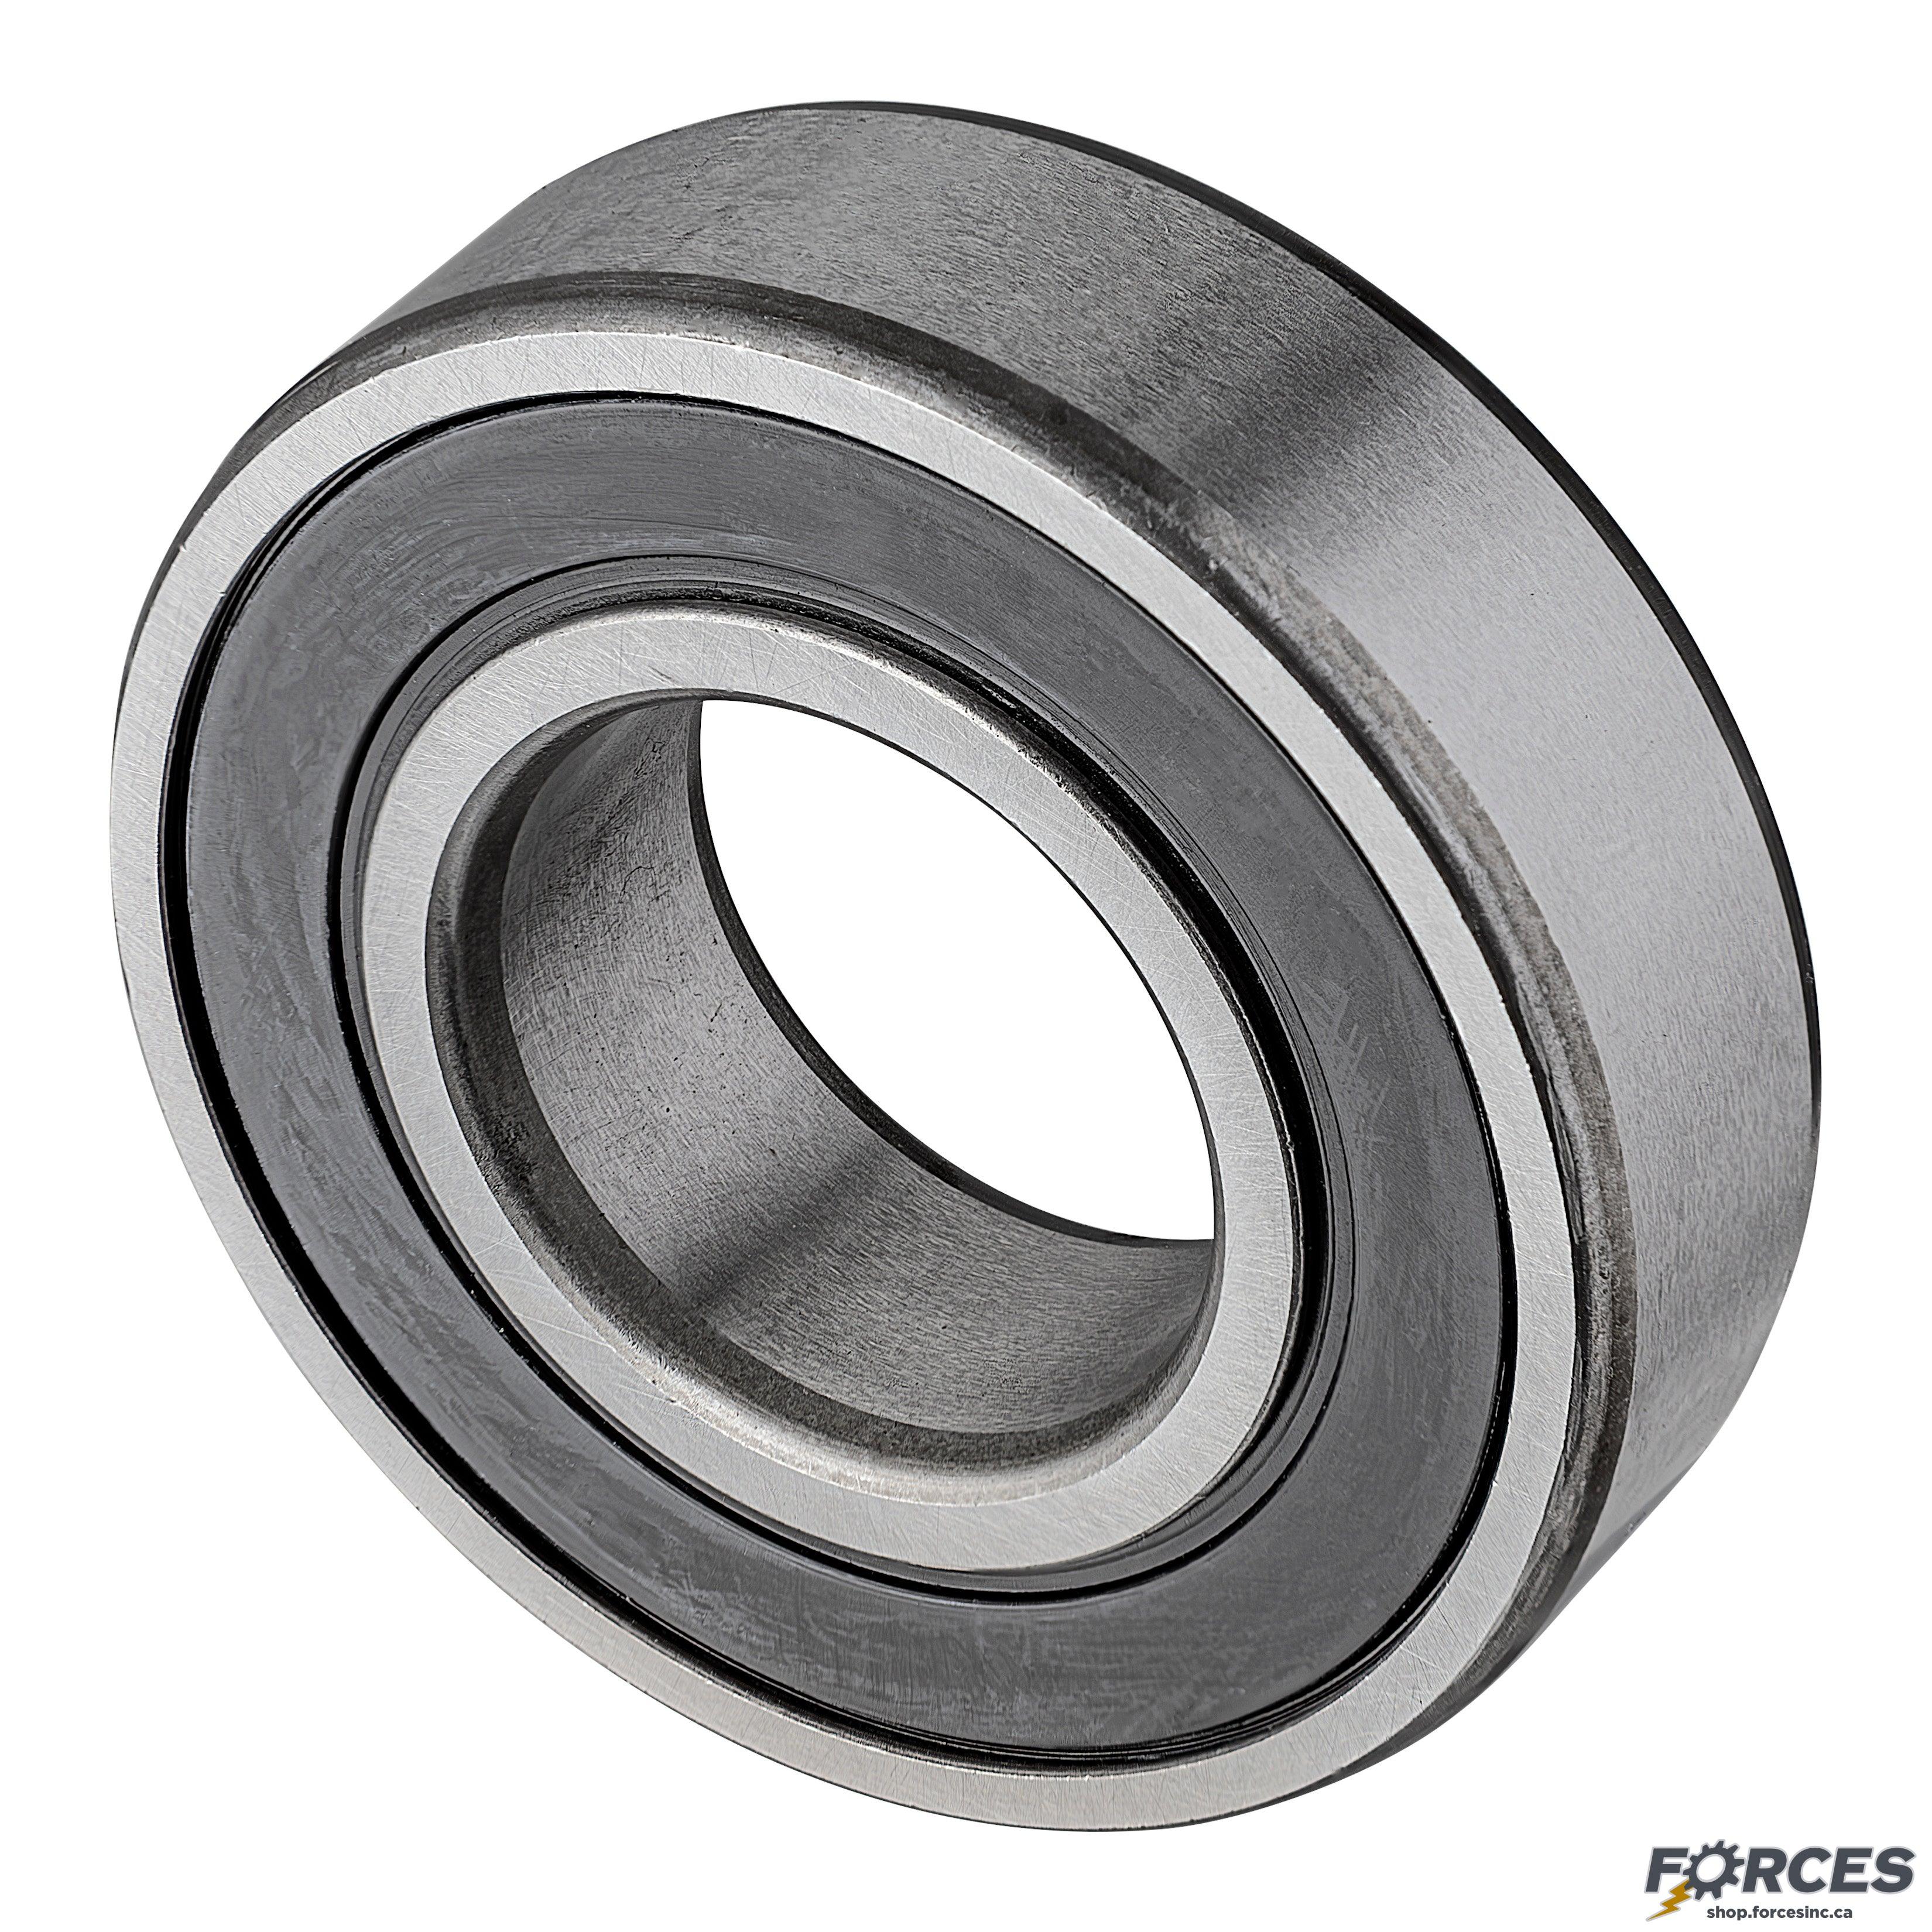 6200-2RS | Ball Bearings Metric 10mmx30mmx9mm Seal 2RS - Forces Inc